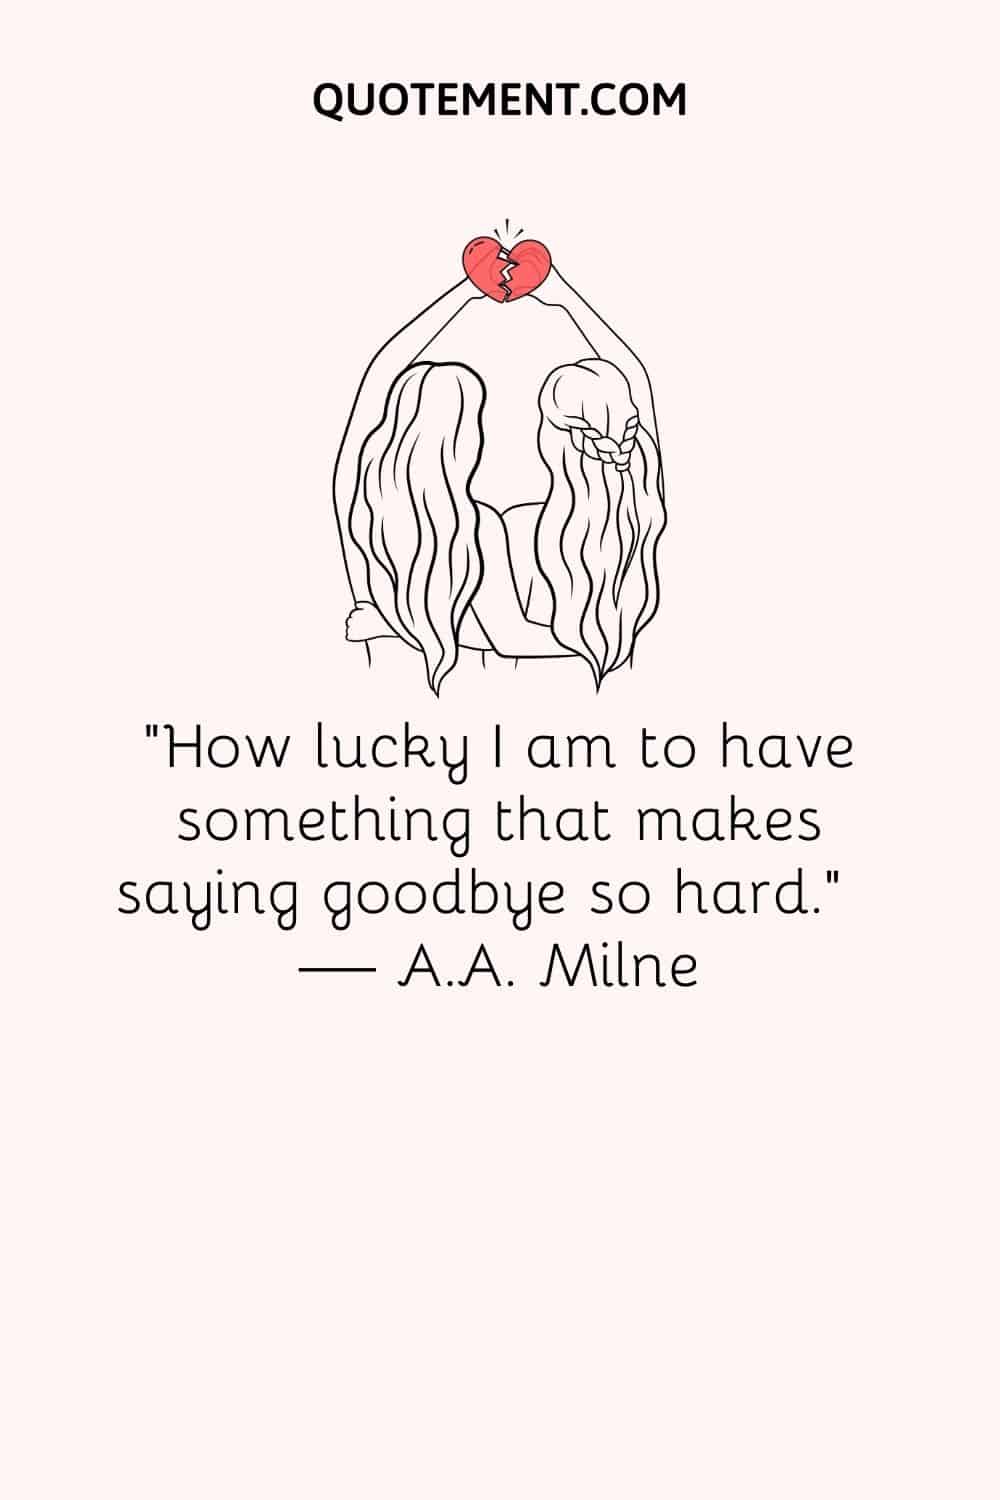 two hugged girls holding a red heart illustration representing inspirational losing friends quote